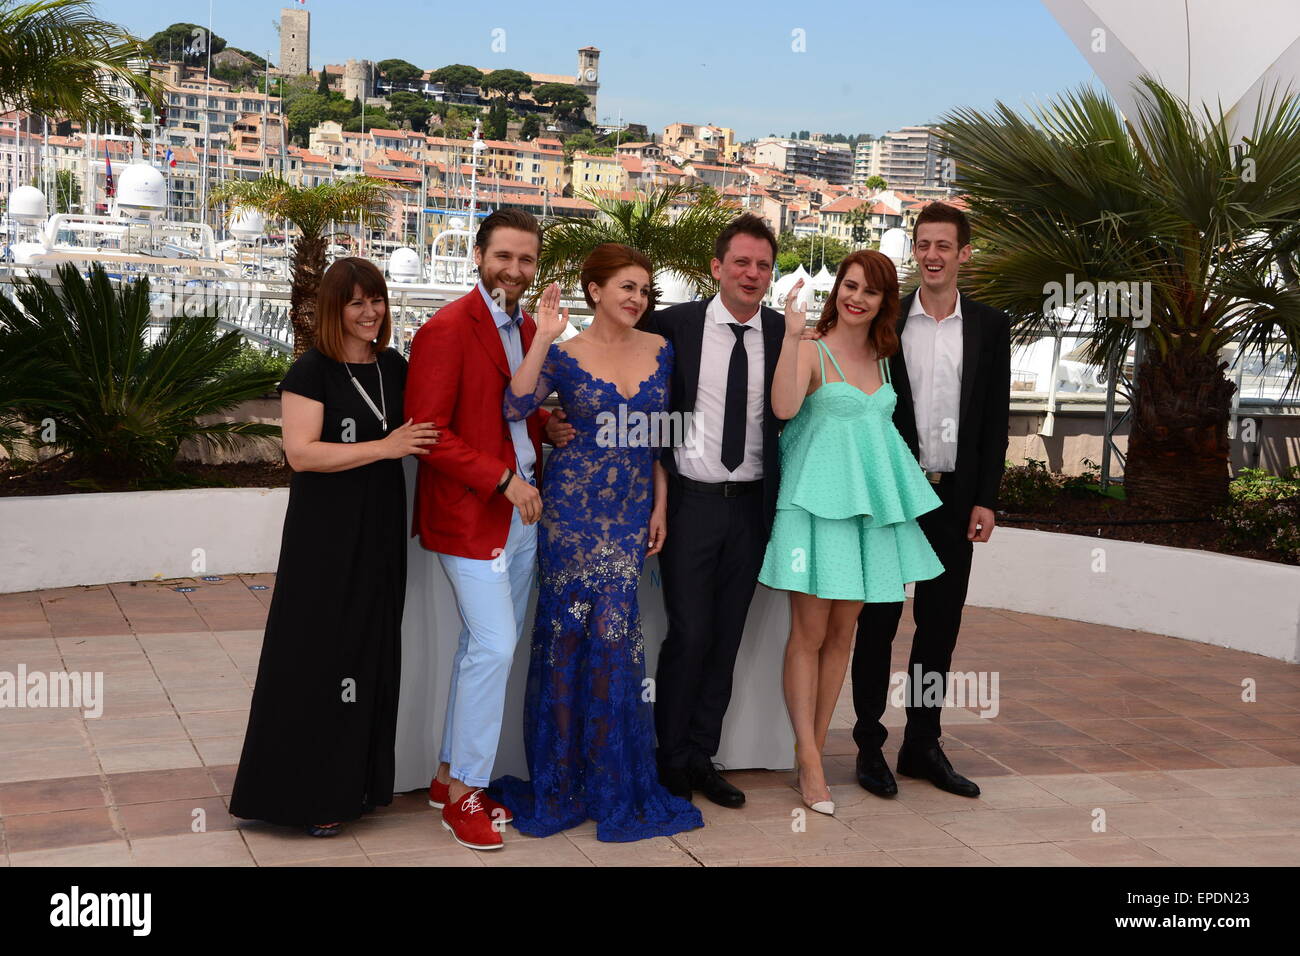 Cannes, France. 14th May, 2015. CANNES, FRANCE - MAY 17: (from third left) actress Nives Ivankovic, director Dalibor Matanic, actress Tihana Lazovic and actor Dado Cosic attend the 'Zvidan' Photocall during the 68th annual Cannes Film Festival on May 17, 2015 in Cannes, France. © Frederick Injimbert/ZUMA Wire/Alamy Live News Stock Photo